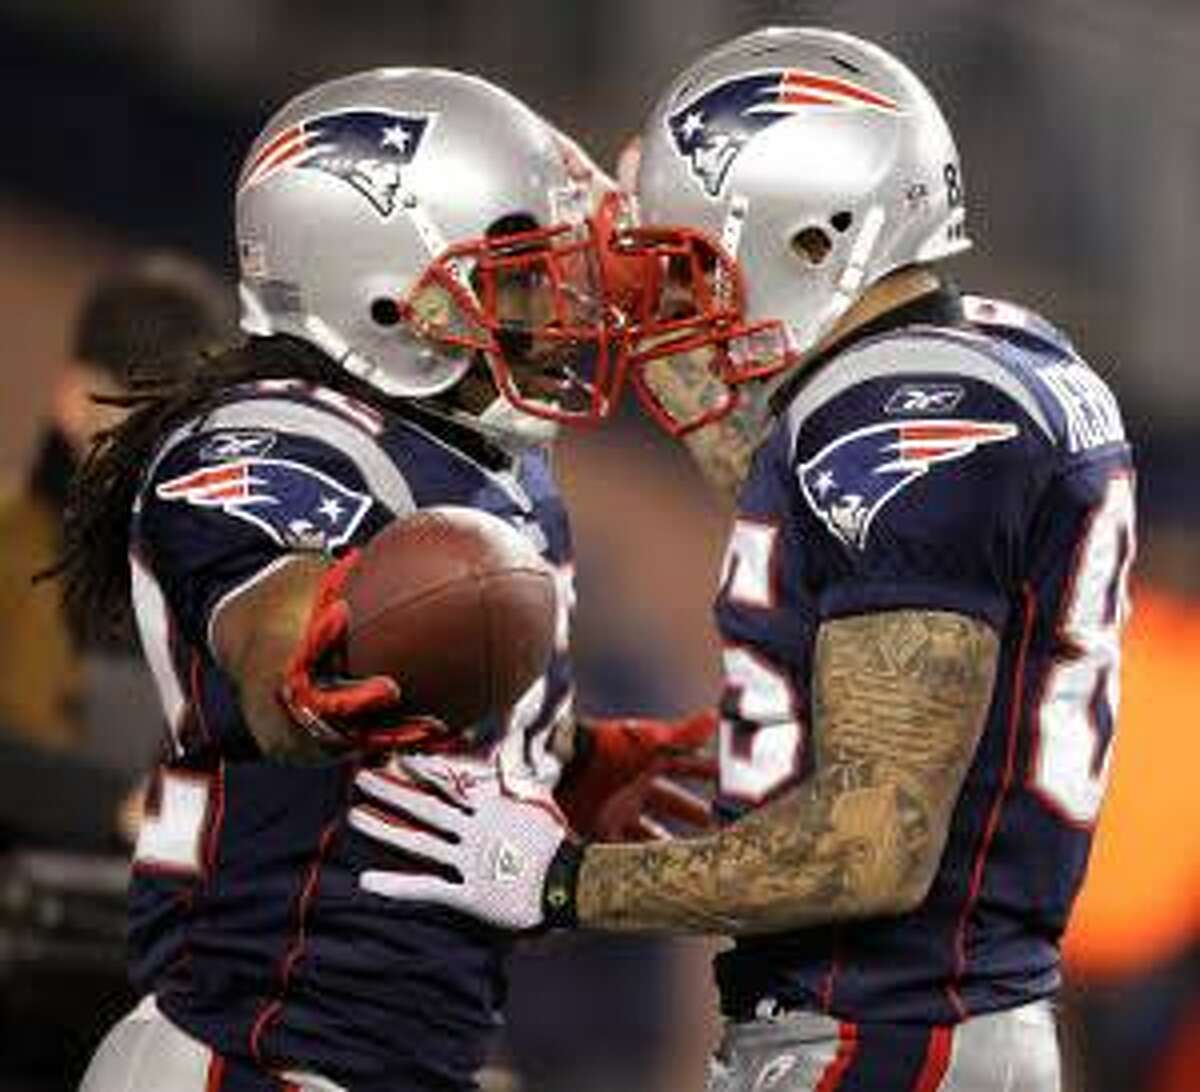 New England Patriots running back BenJarvus Green-Ellis (42) celebrates with New England Patriots tight end and Bristol native Aaron Hernandez (85) after Green-Ellis scored a rushing touchdown during the first quarter of their game against the New York Jets Monday night in Foxboro, Mass. (AP Photo/Stephan Savoia)